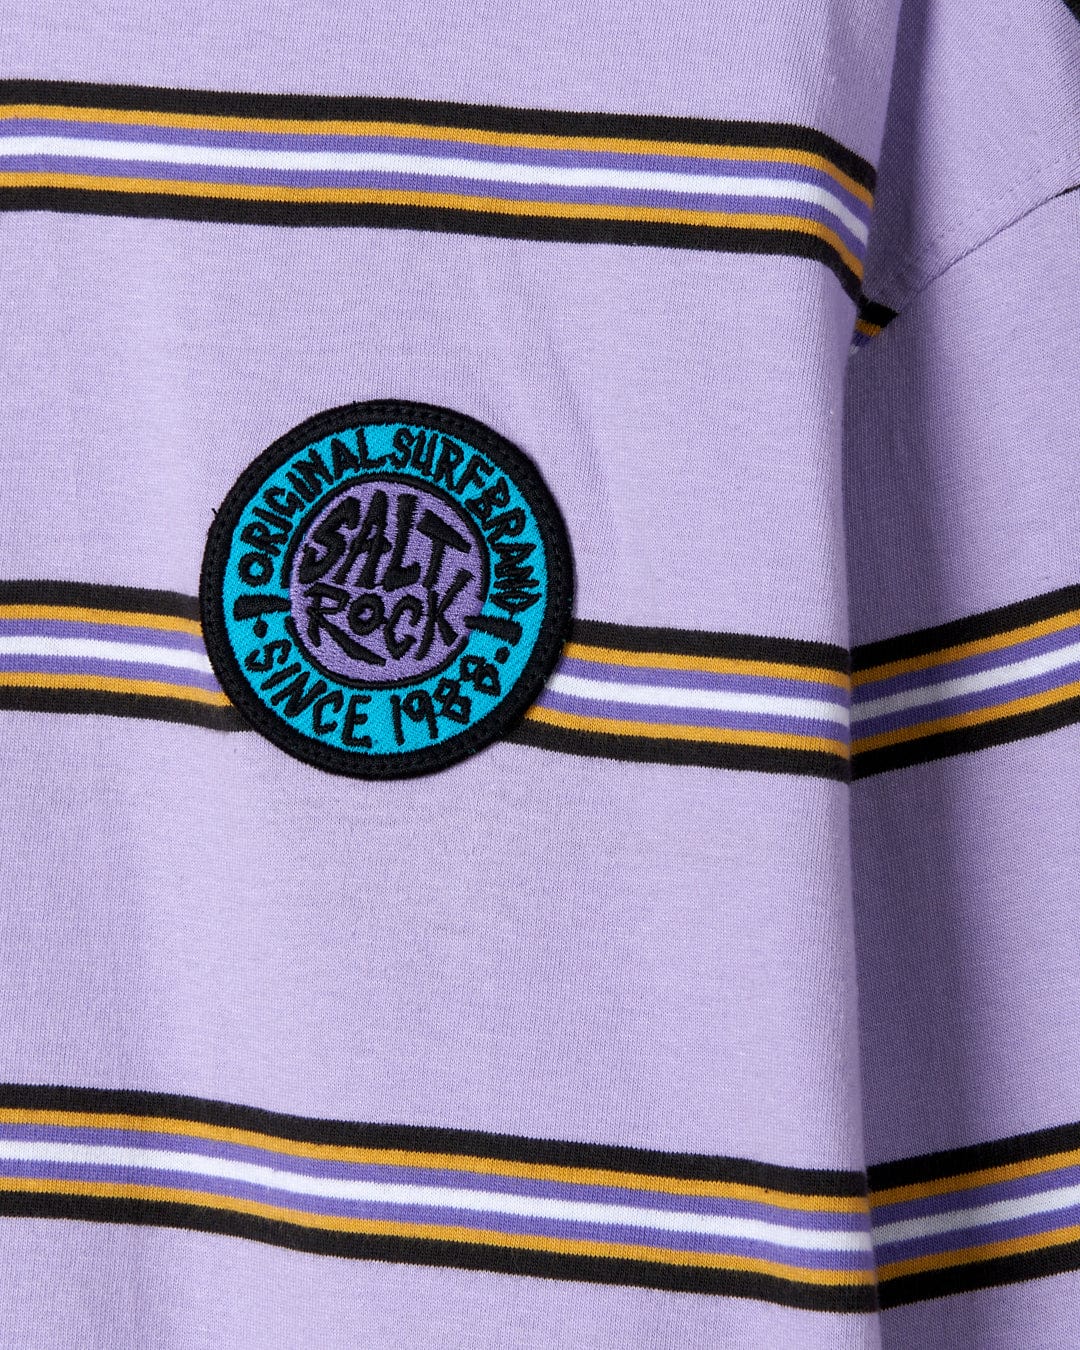 Close-up of a striped, cotton garment with an embroidered retro surf badge reading "SR Original surf brand Saltrock since 1988".